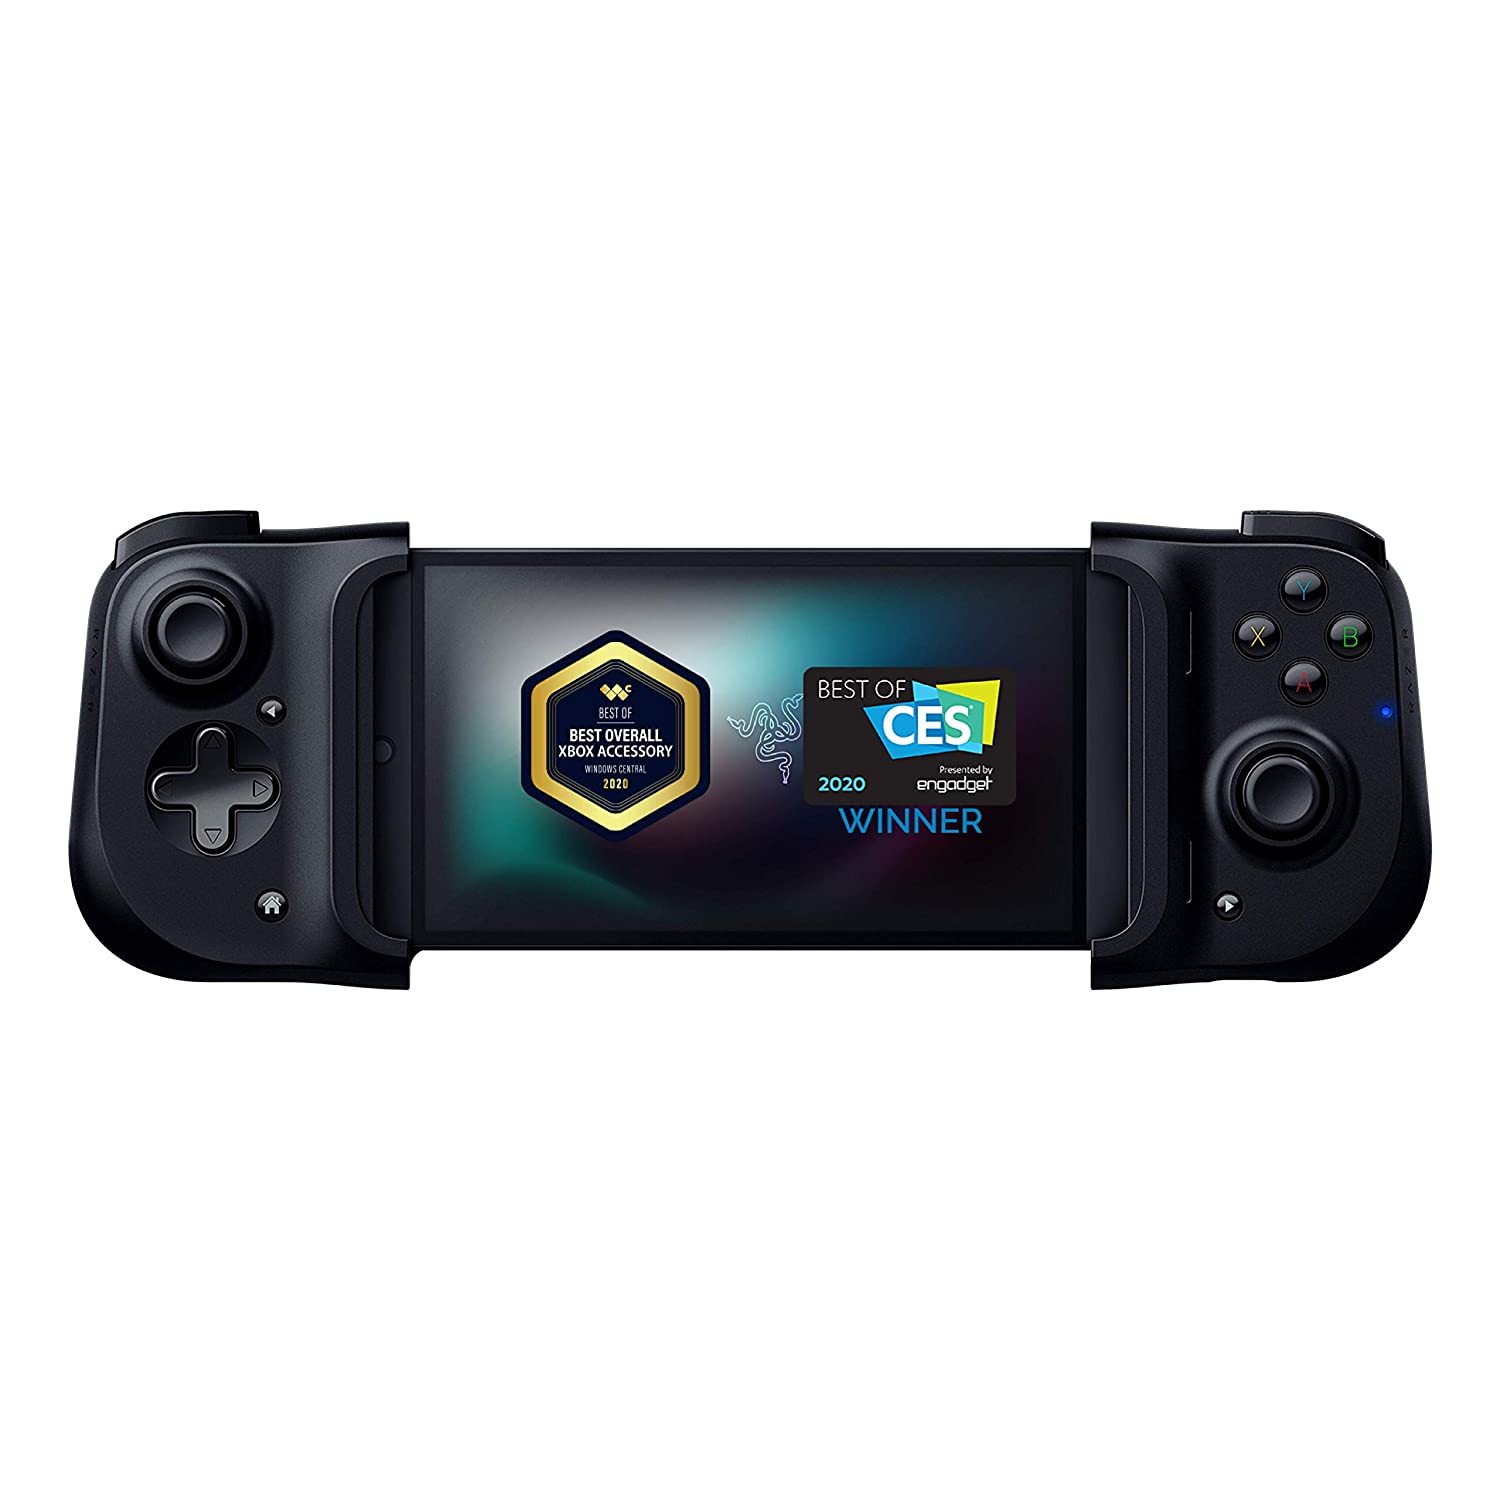 Razer Kishi Mobile Game Controller / Gamepad for Android $45 + free s/h at Amazon